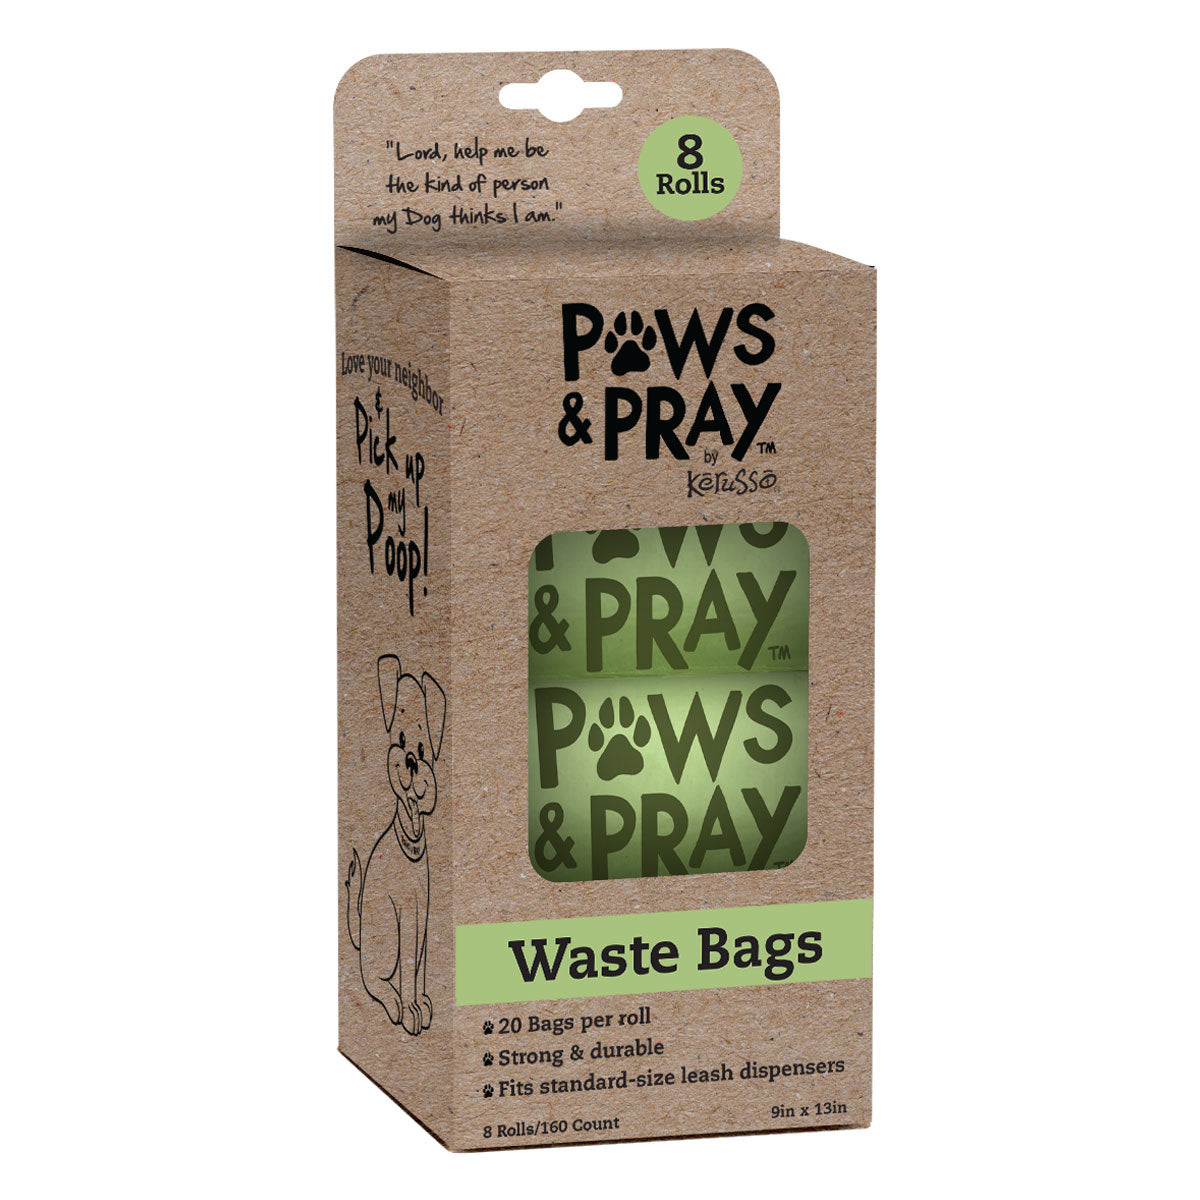 Paws & Pray Pet Waste Bag 8 Pack Refill